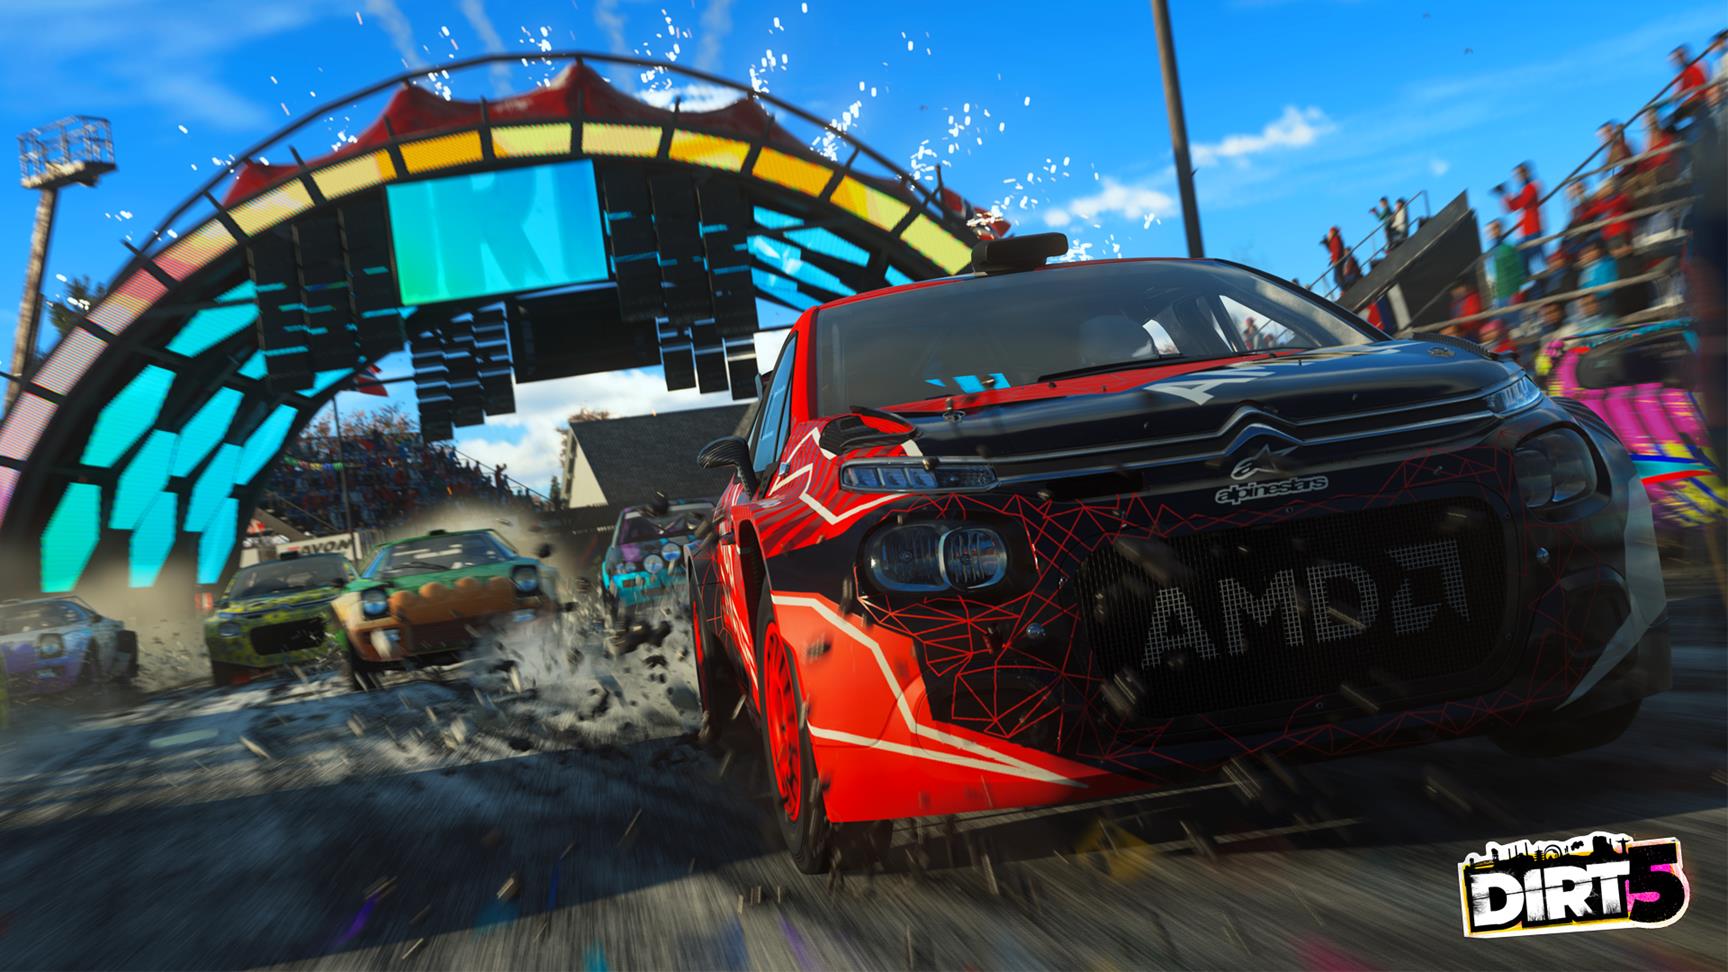 Image for Dirt 5 is coming to Xbox Series X, PS5 and PC